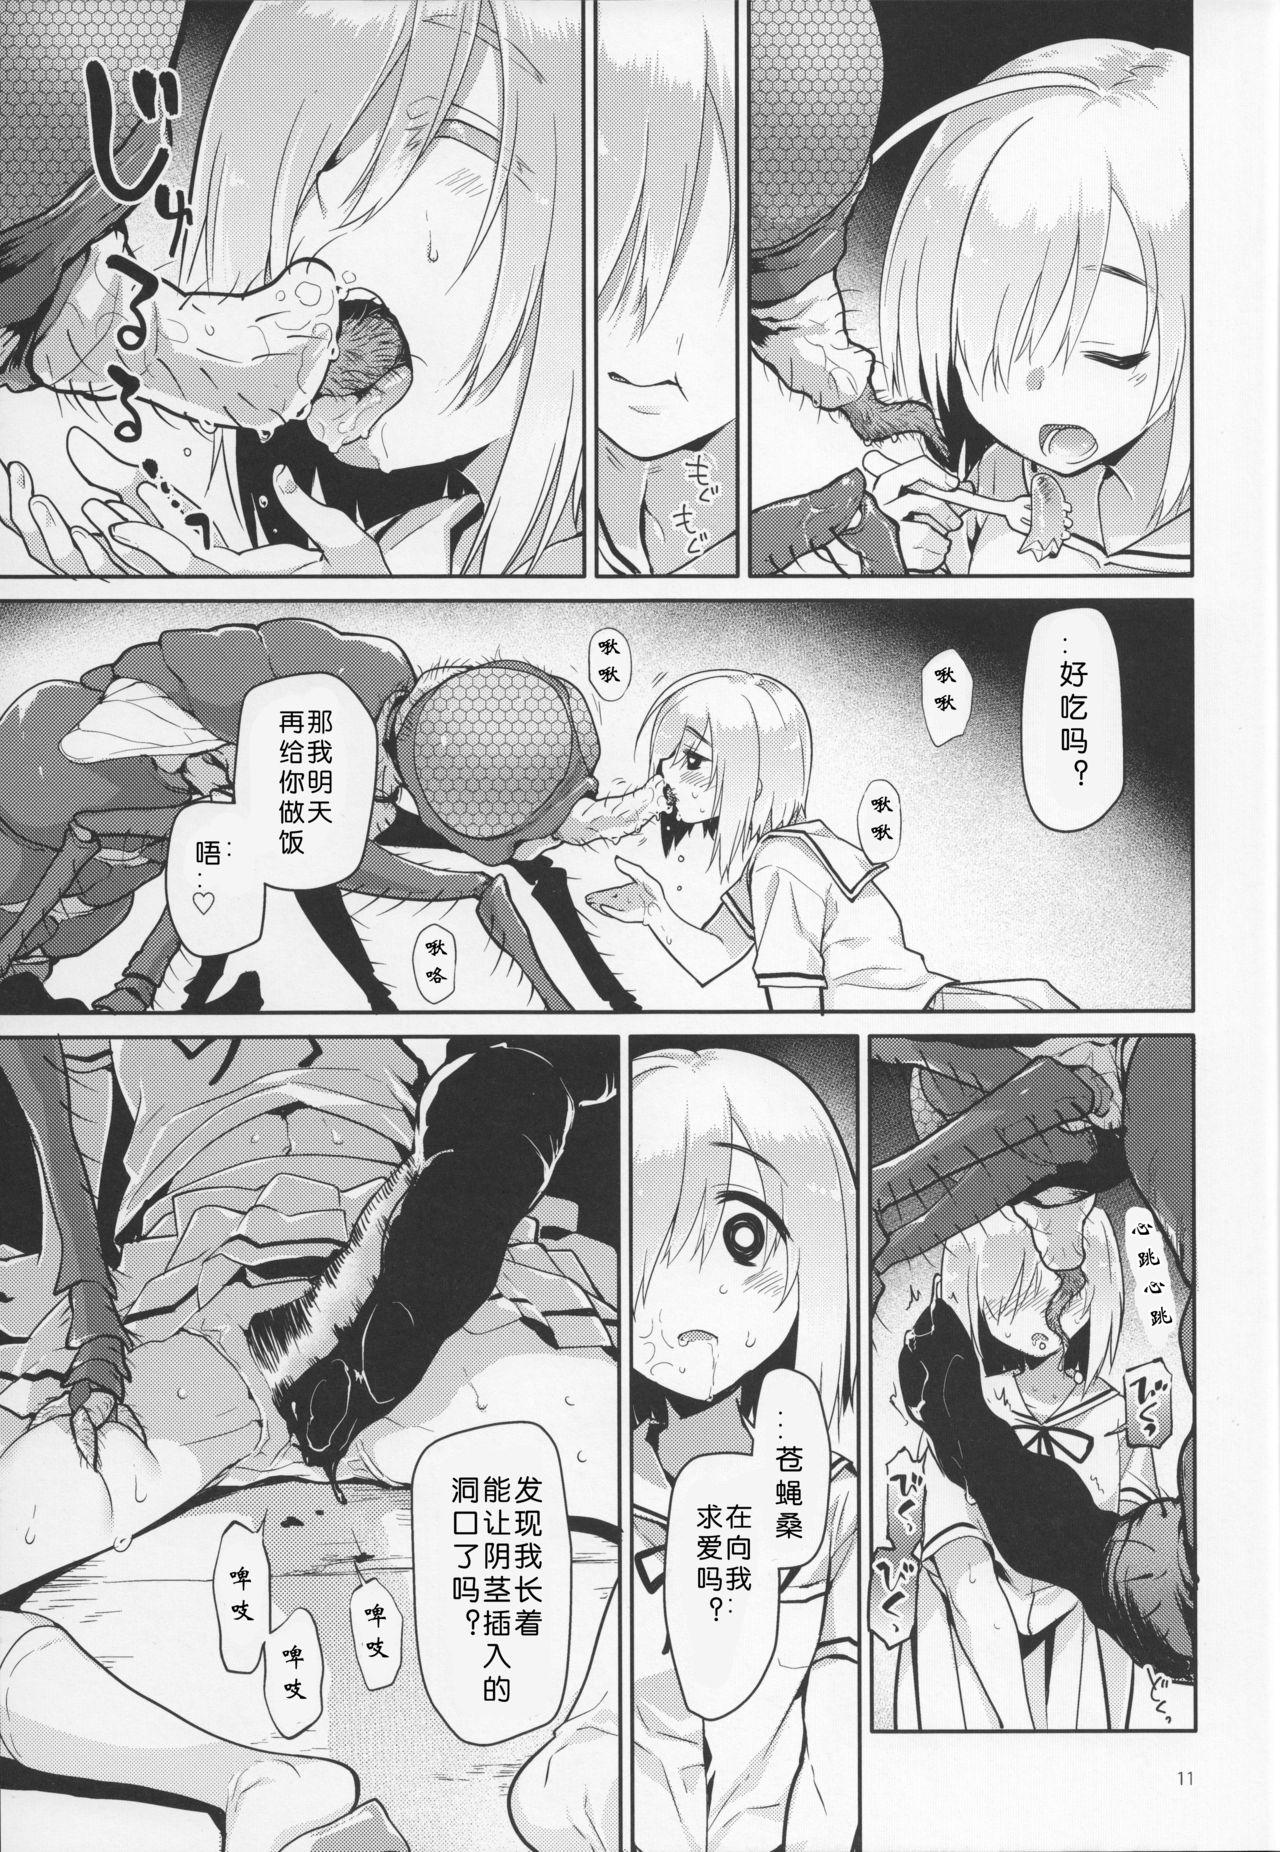 Tites Uchuujin no Ie - Home of alien Egypt - Page 10